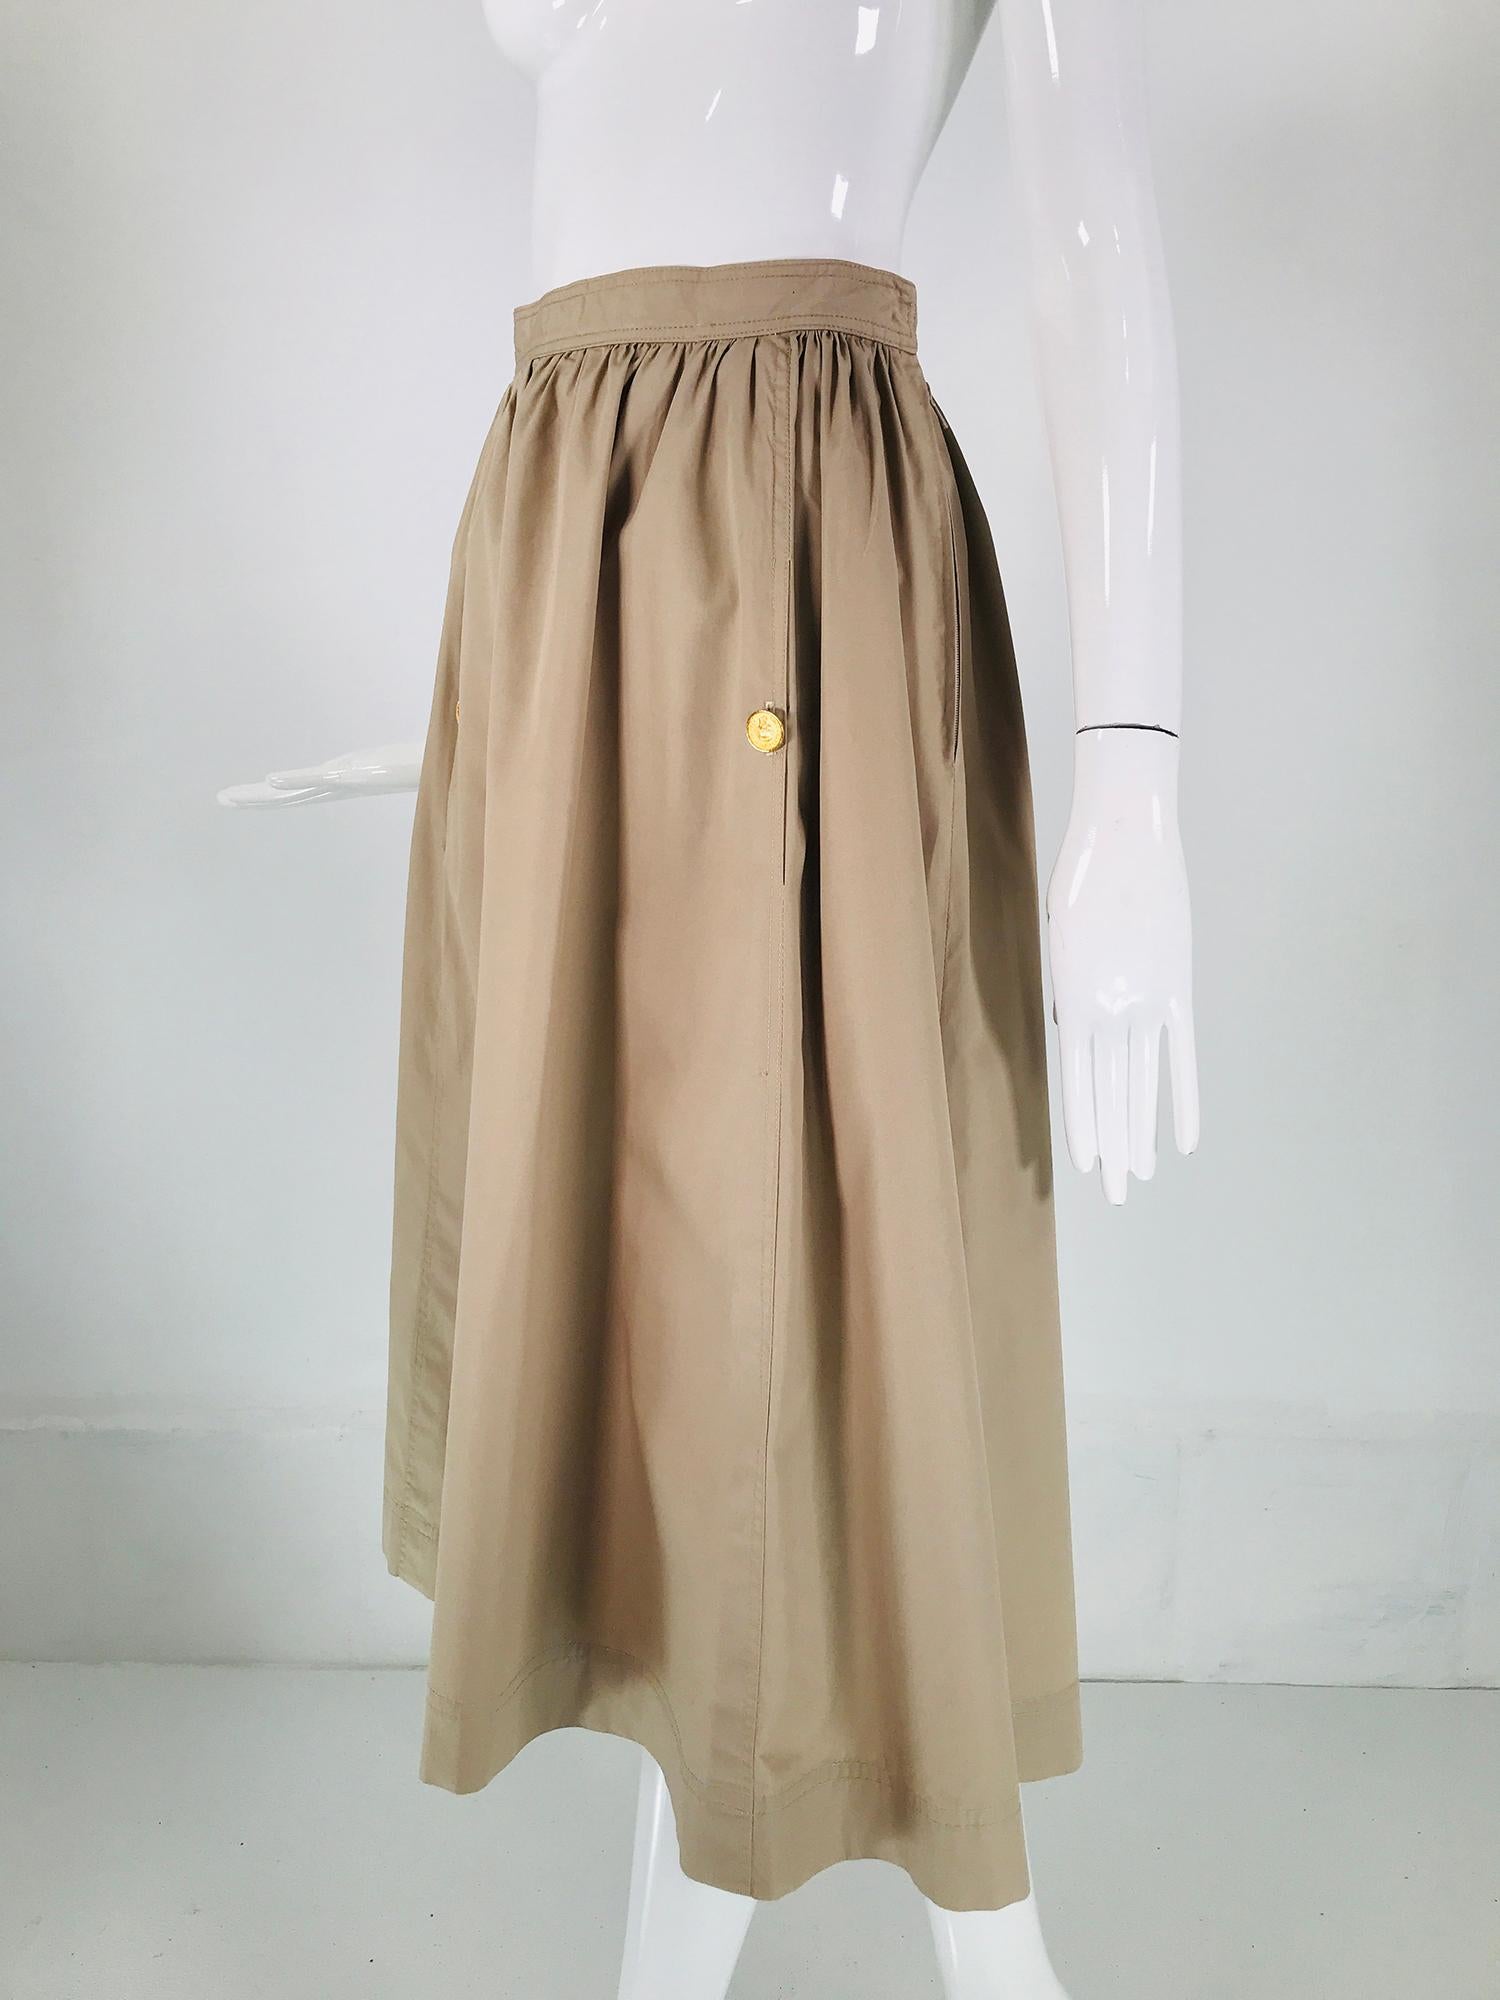 Vintage Chanel Tan Poplin Gathered Skirt with Button Pockets 1